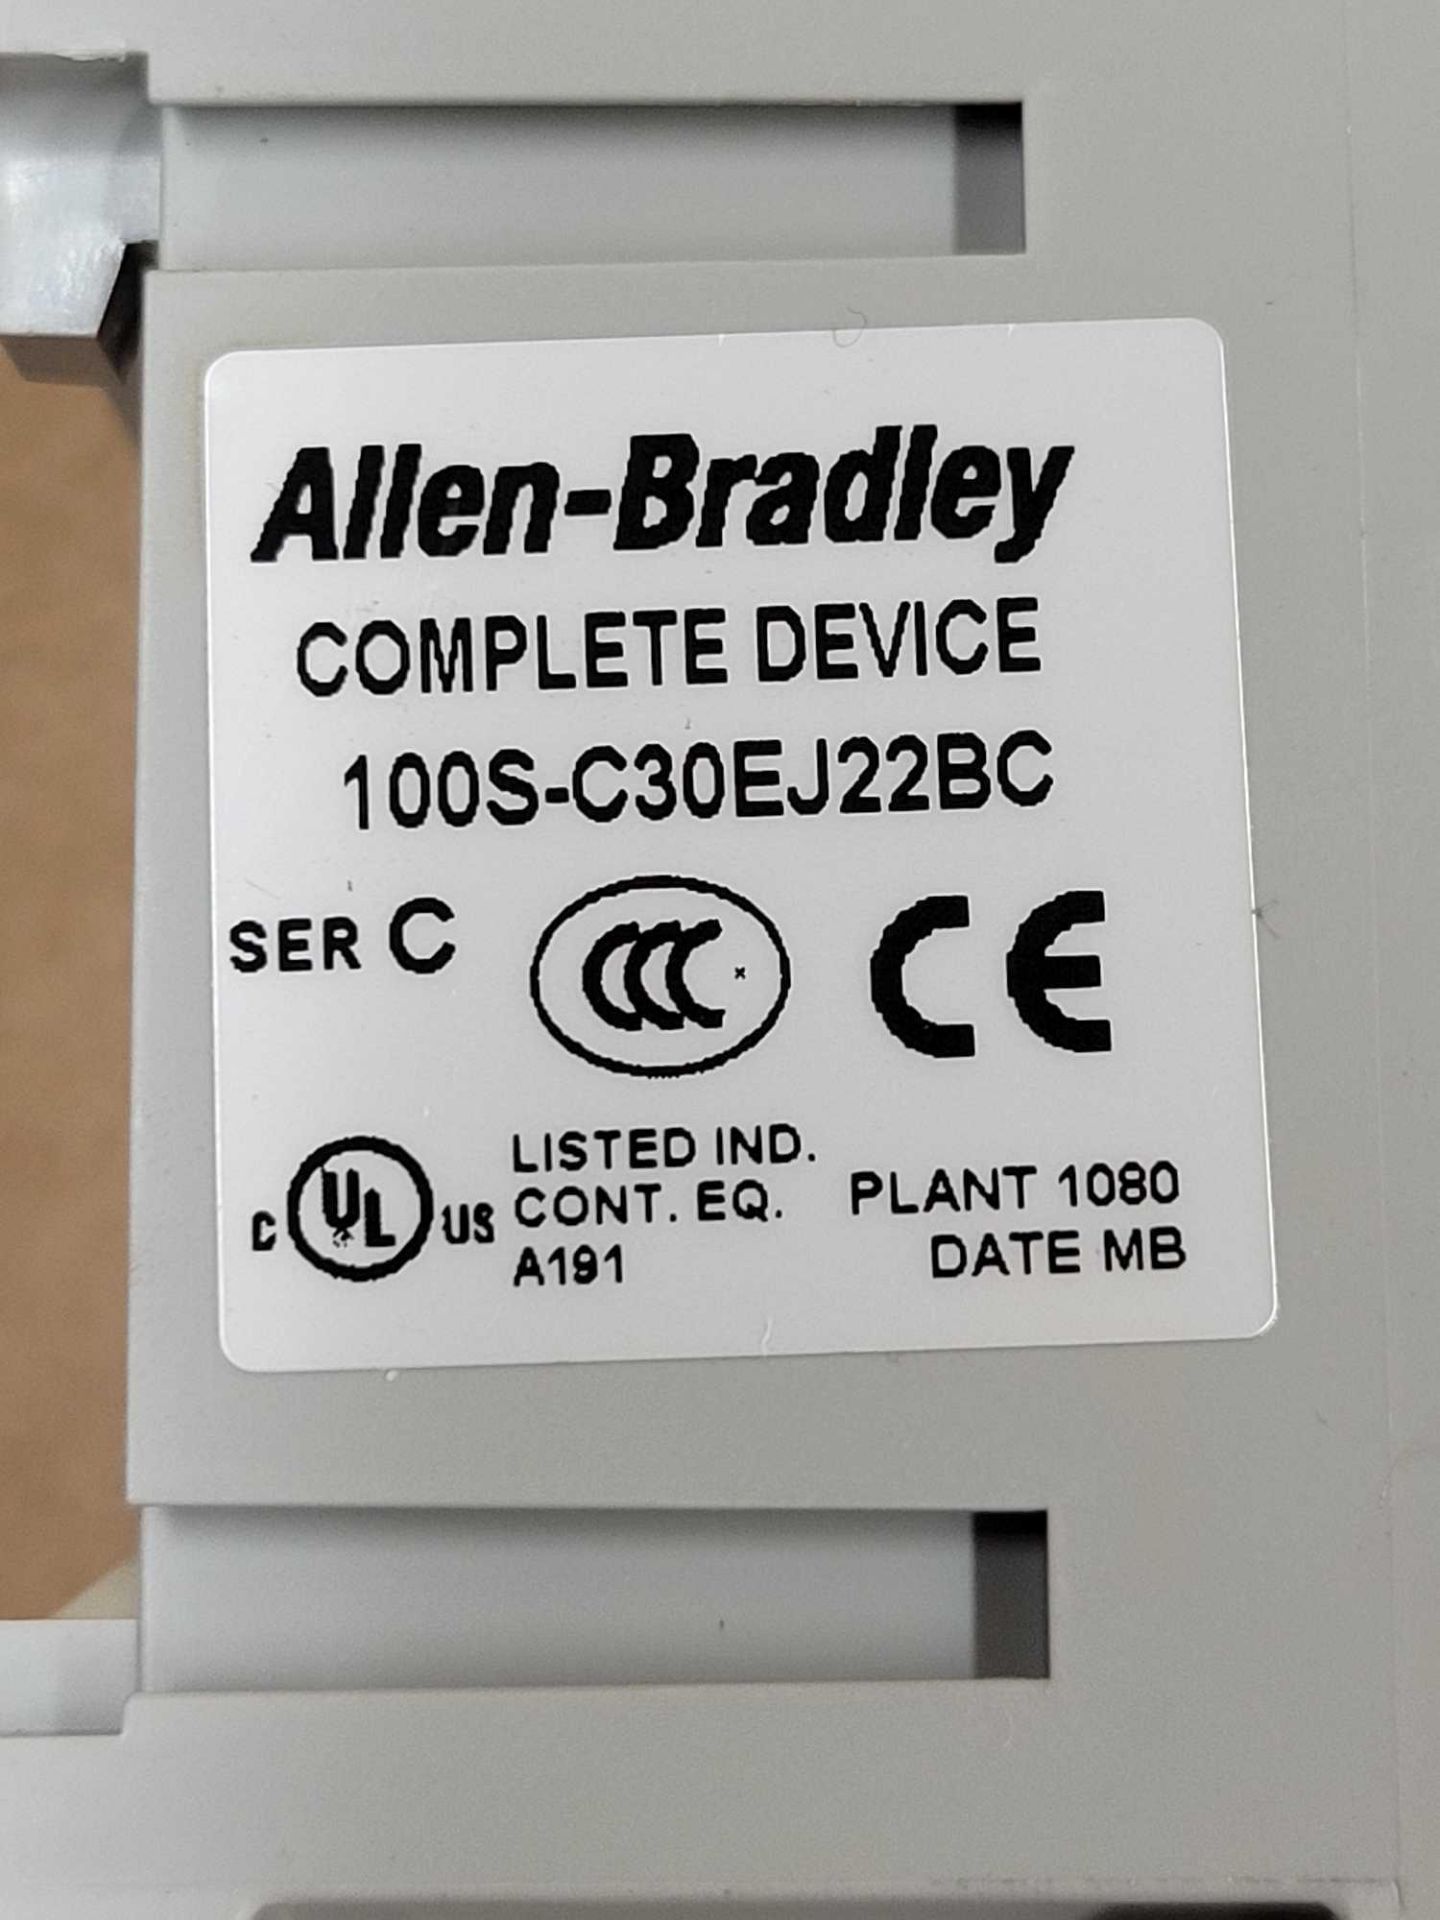 LOT OF 5 ALLEN BRADLEY 100S-C30EJ22BC / Guardmaster Safety Contactor  /  Lot Weight: 6.0 lbs - Image 7 of 9